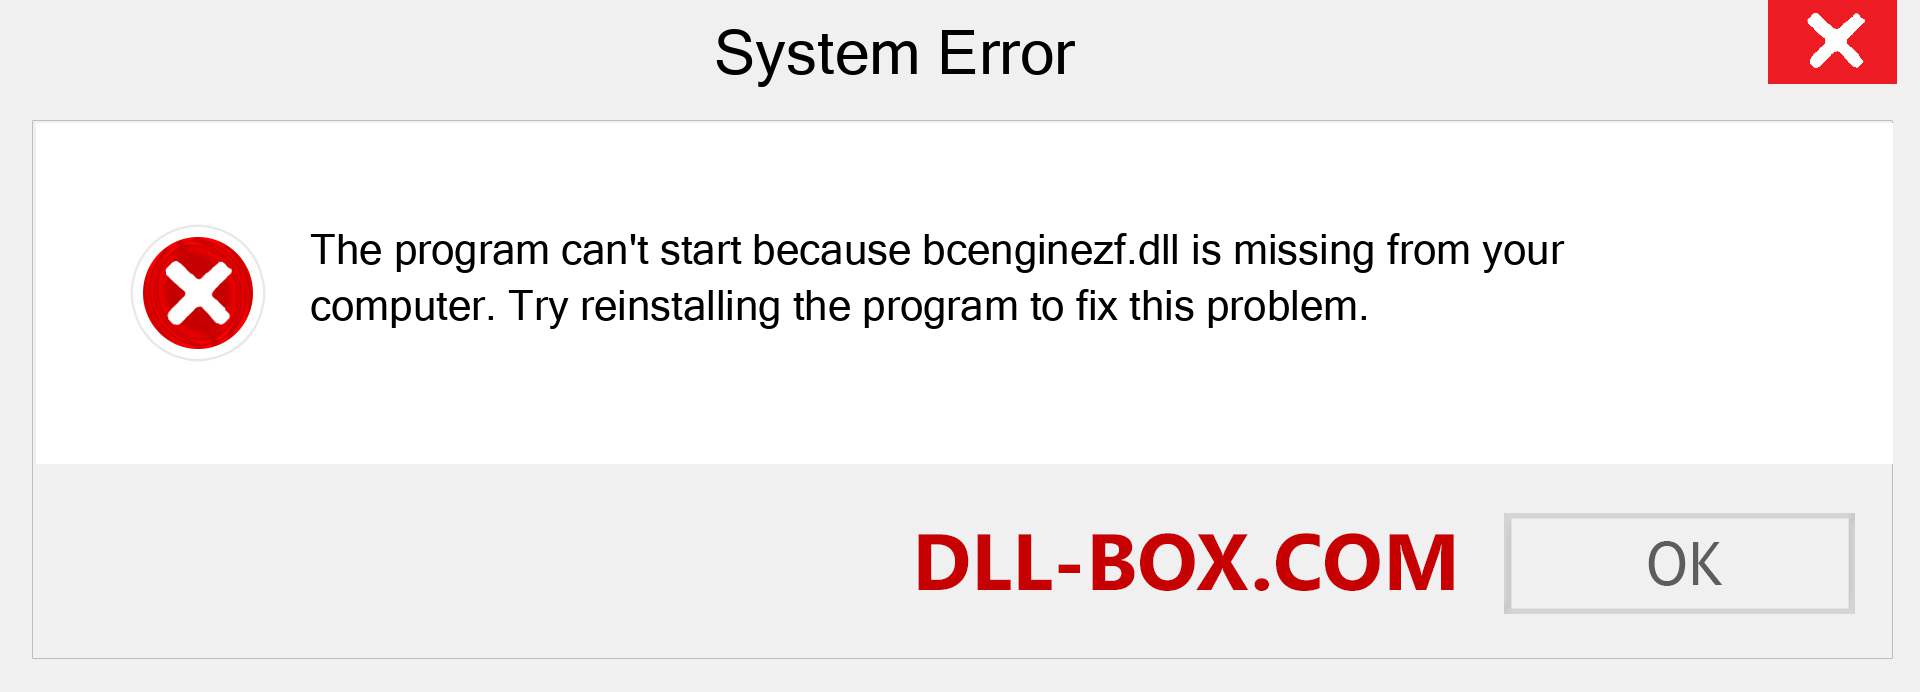  bcenginezf.dll file is missing?. Download for Windows 7, 8, 10 - Fix  bcenginezf dll Missing Error on Windows, photos, images